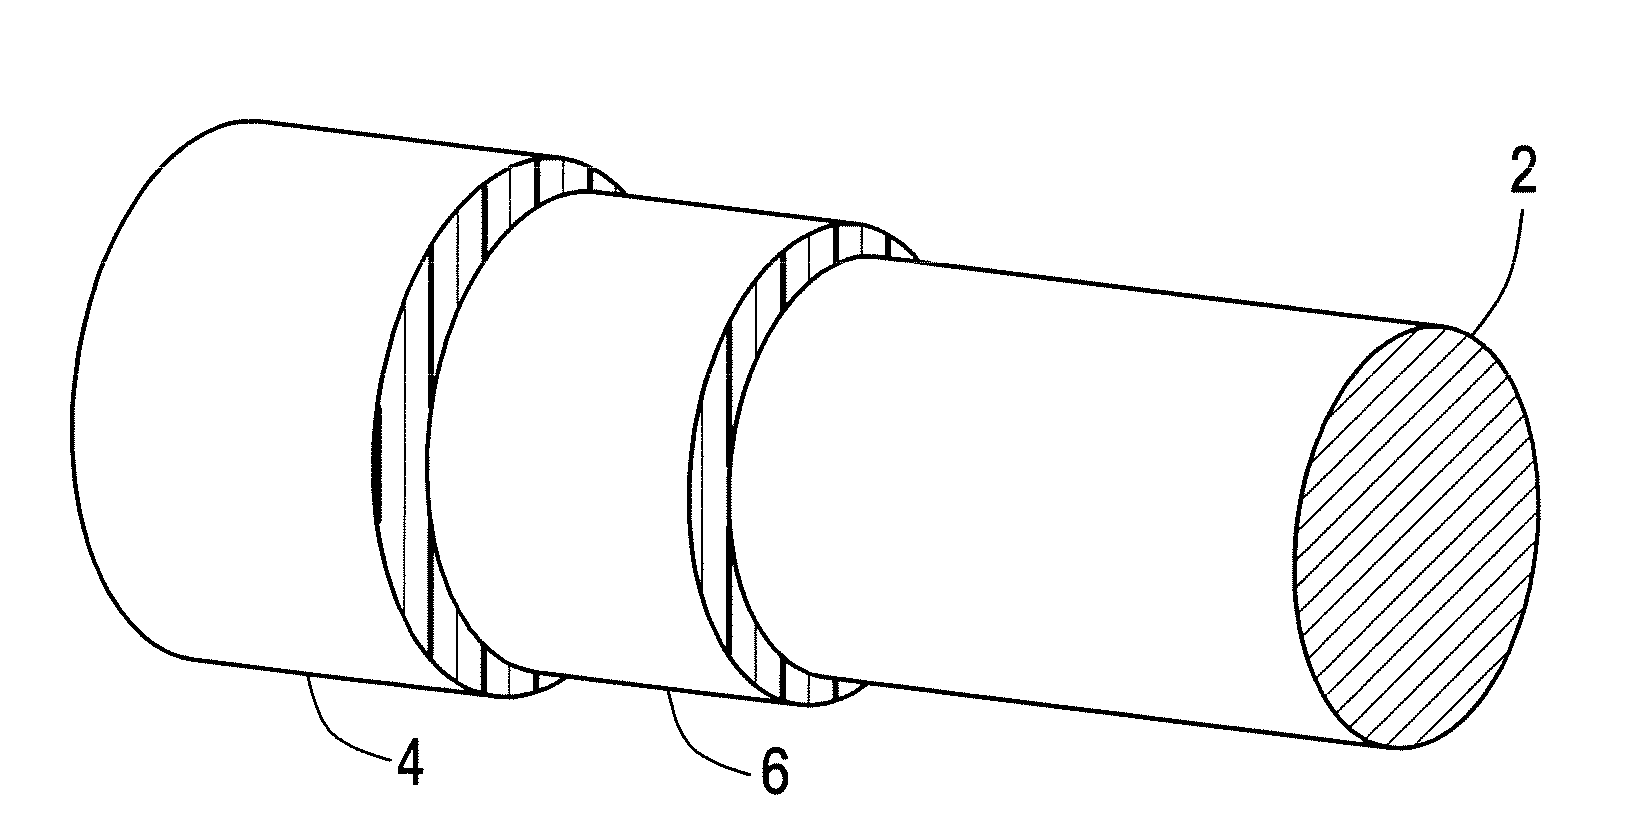 Flame retardant flexible thermoplastic composition, method of making, and articles thereof